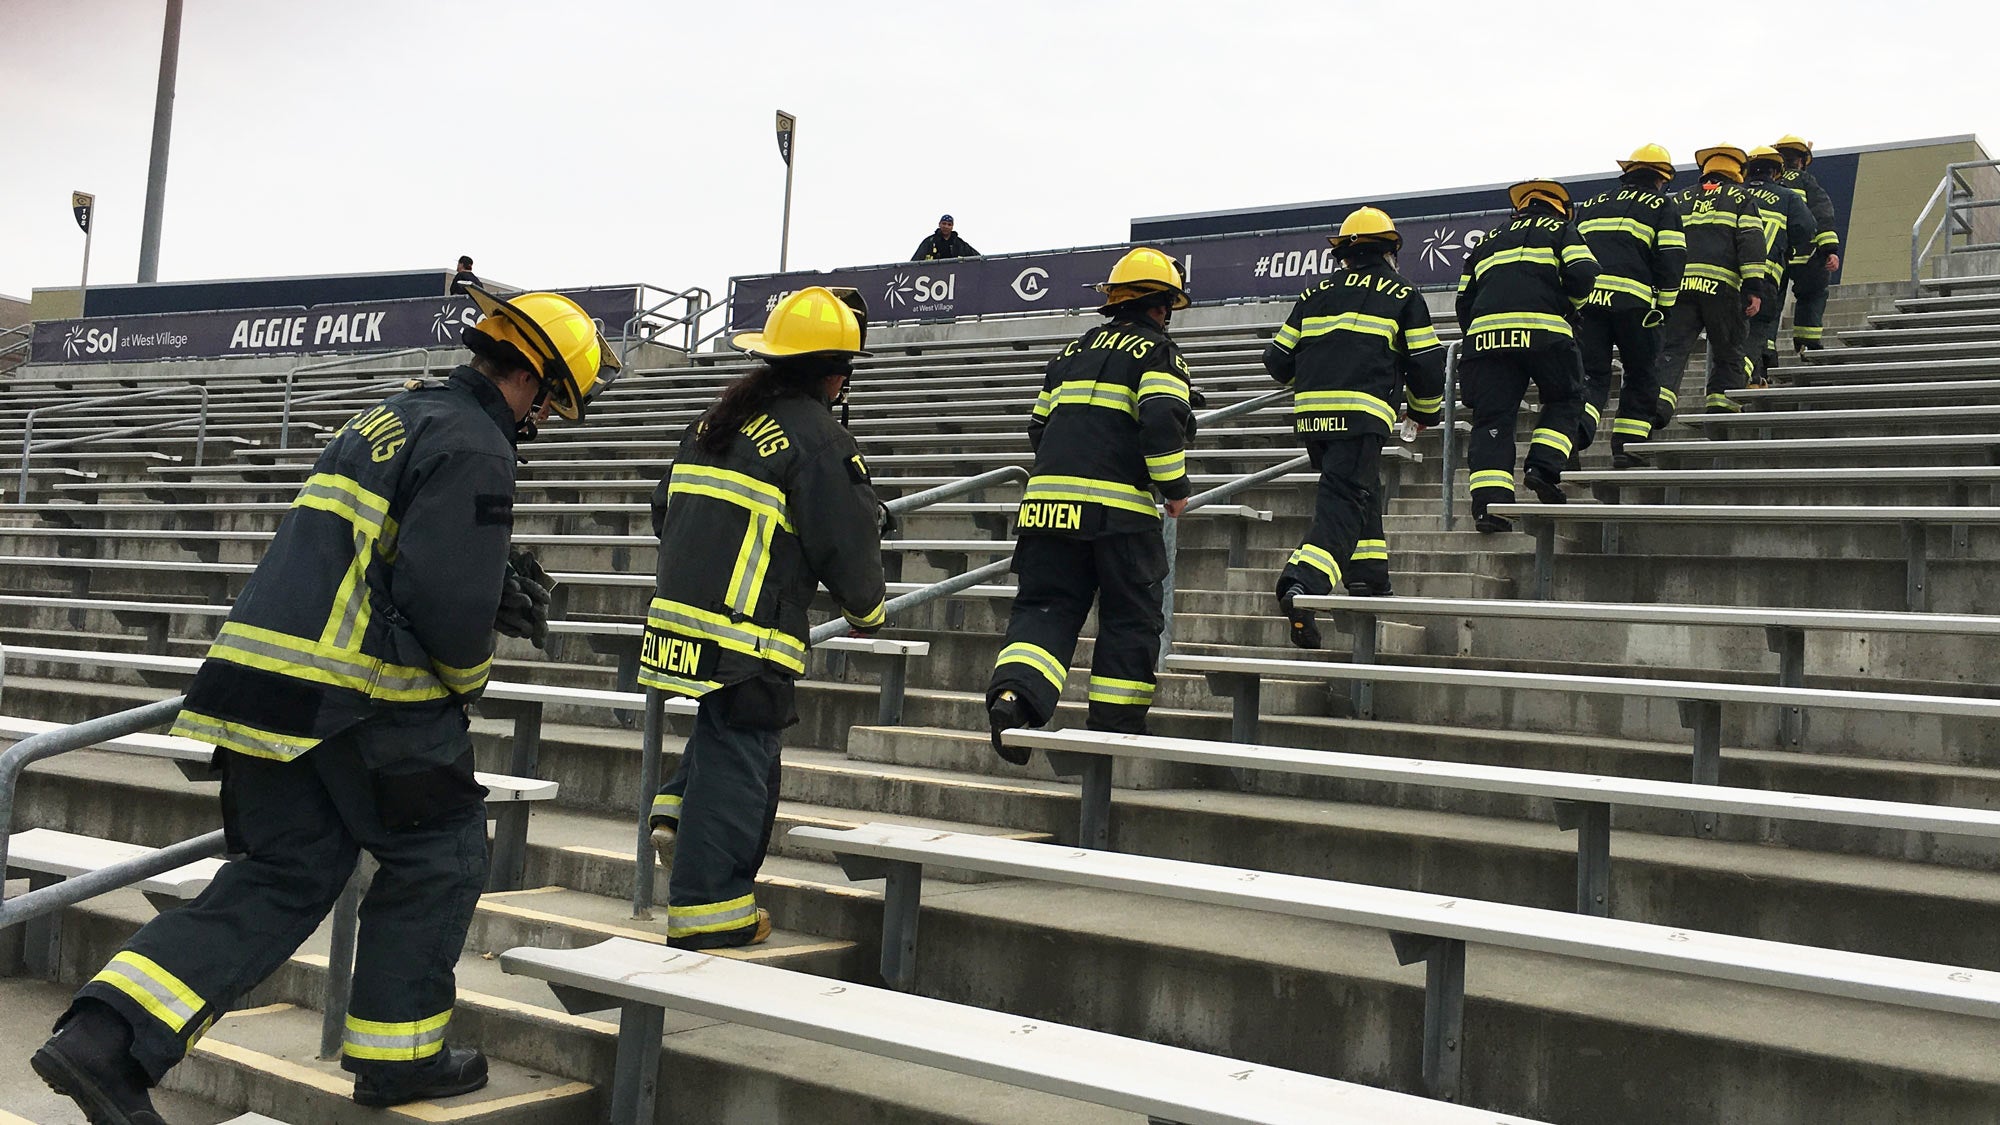 Student firefighters in turnouts walk up stairs